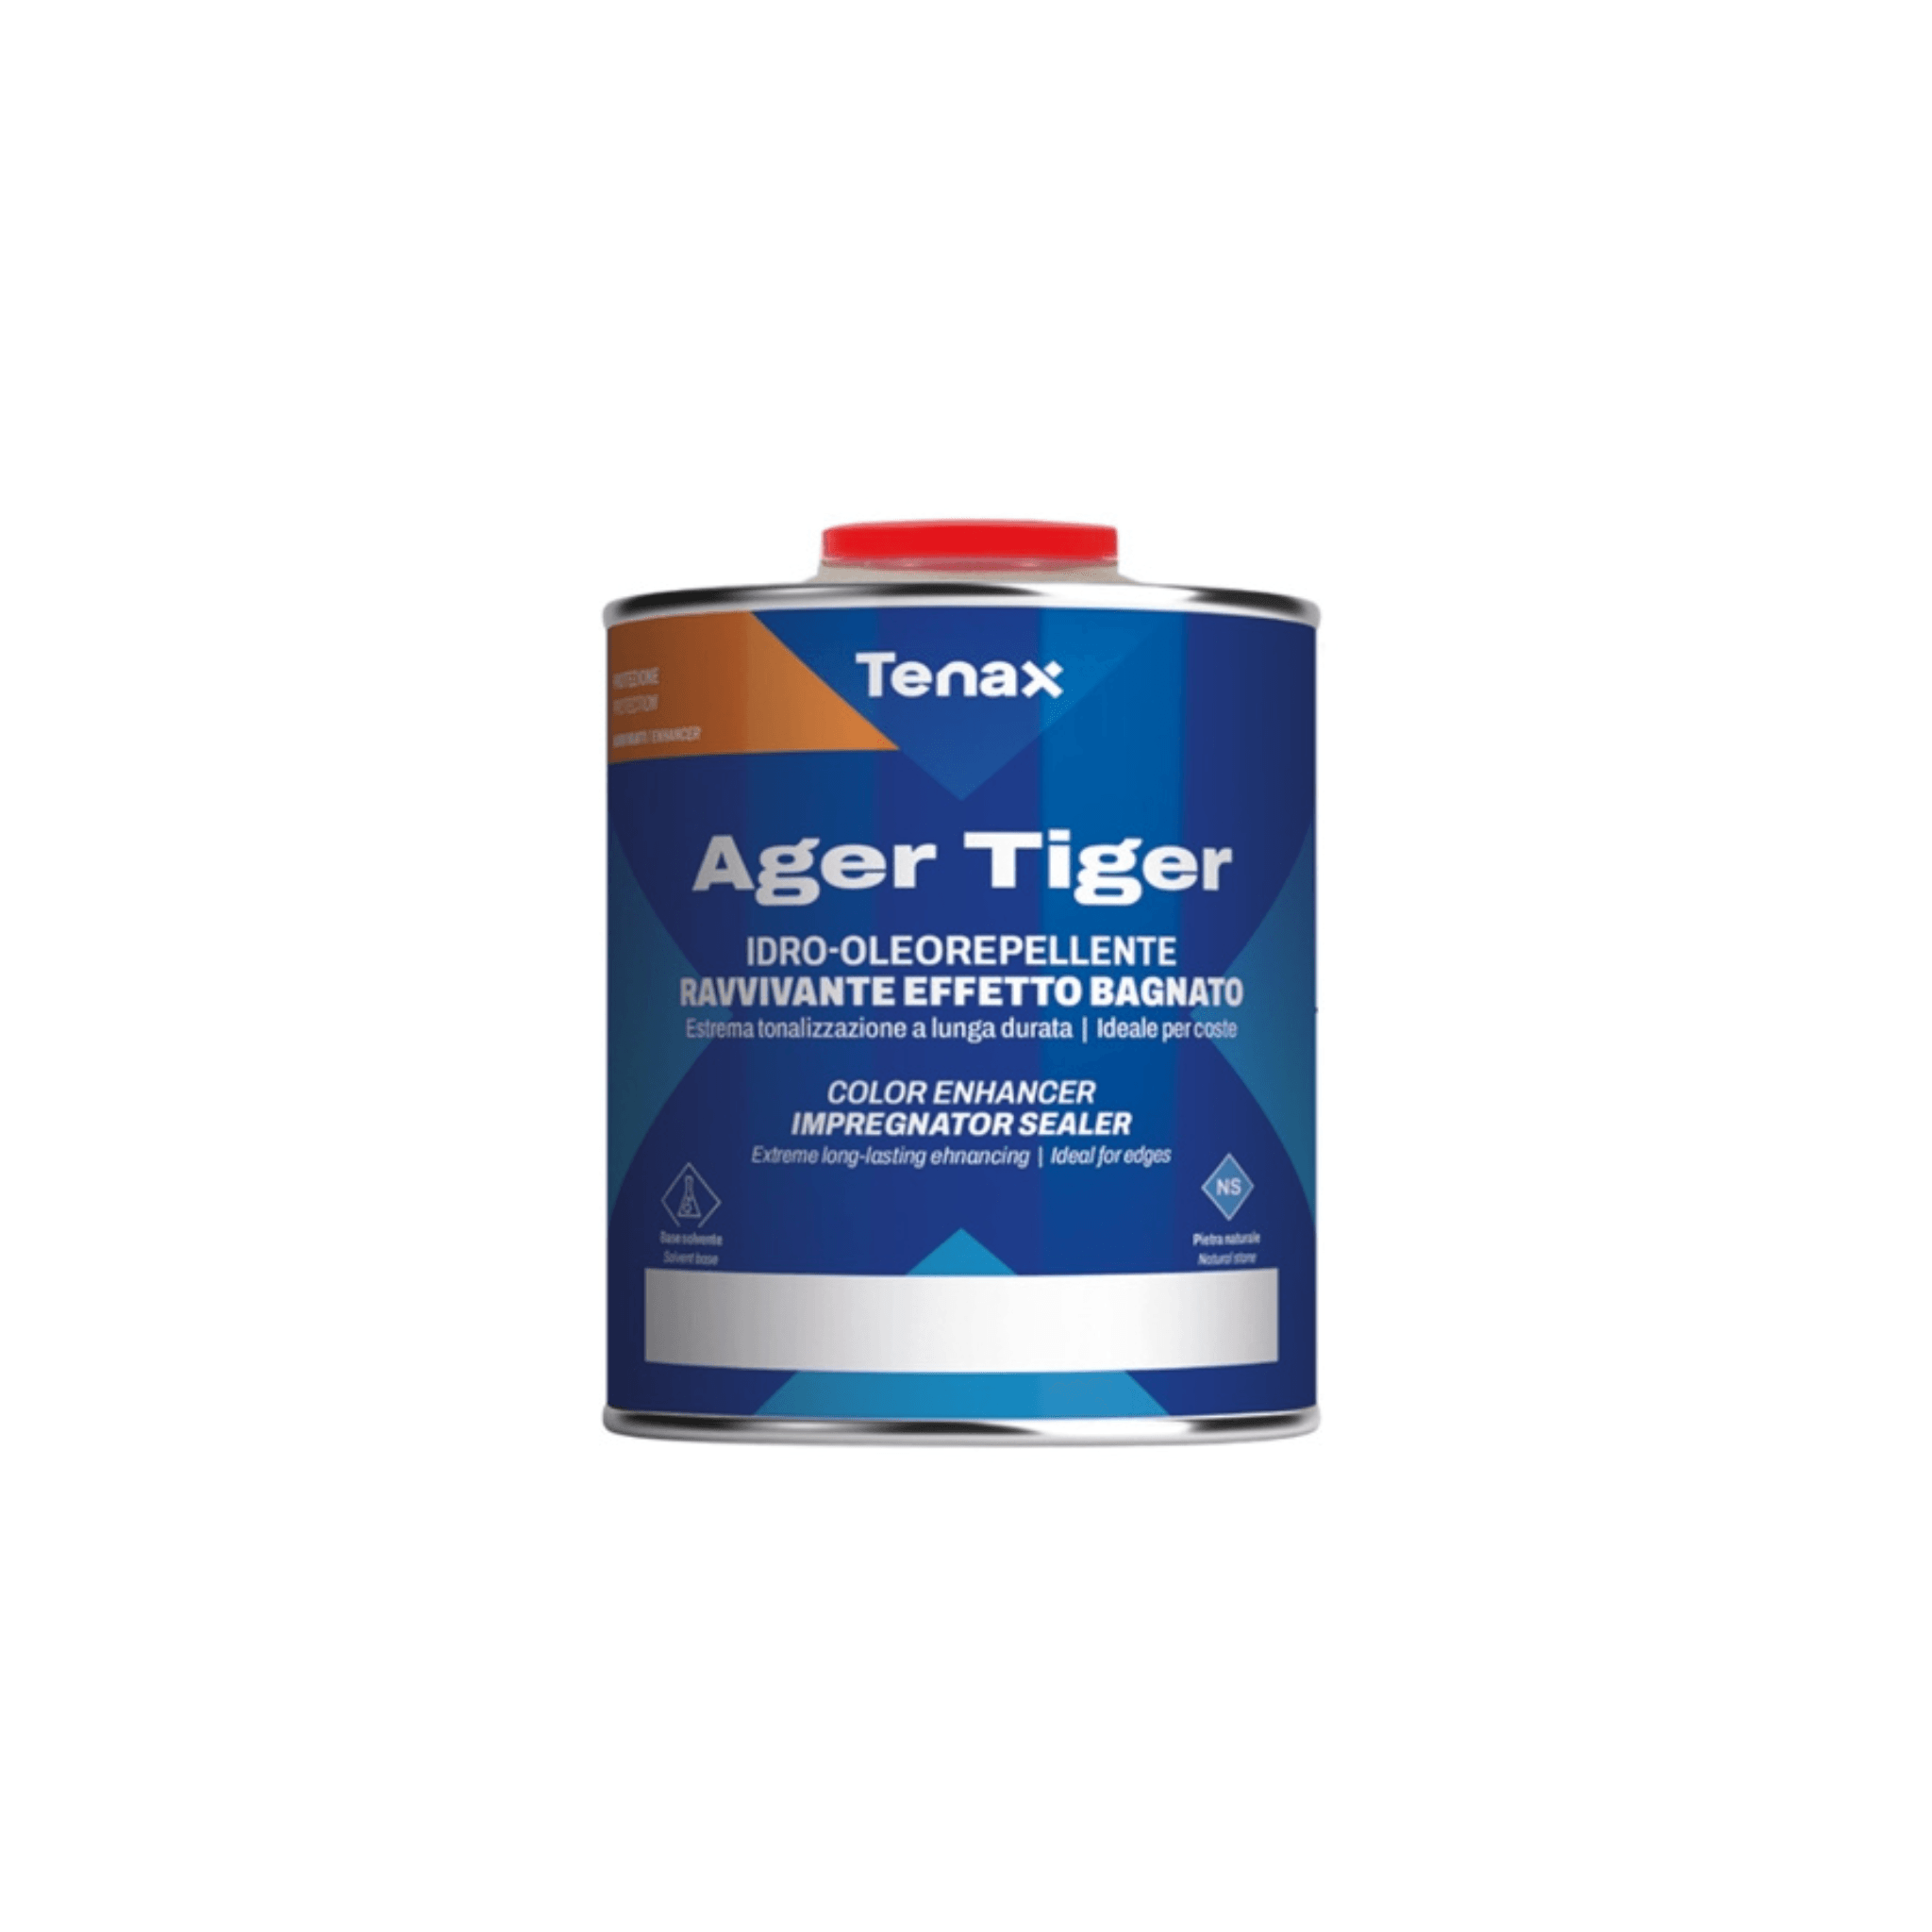 Tenax Ager Tiger Natural Exotic Stone Sealer, 1 Liter - Direct Stone Tool Supply, Inc